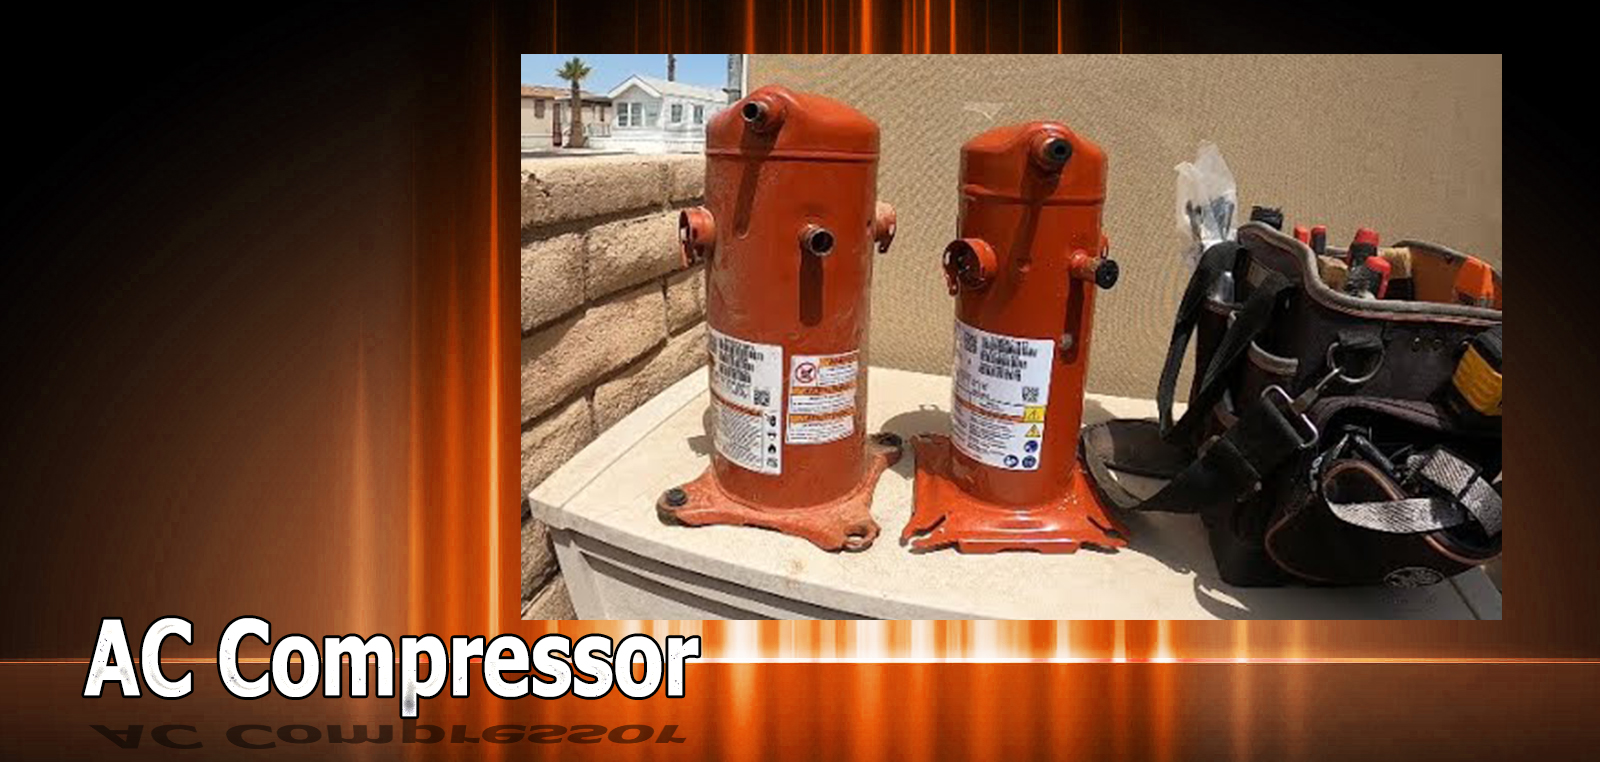 Twin AC compressors with tools on concrete.